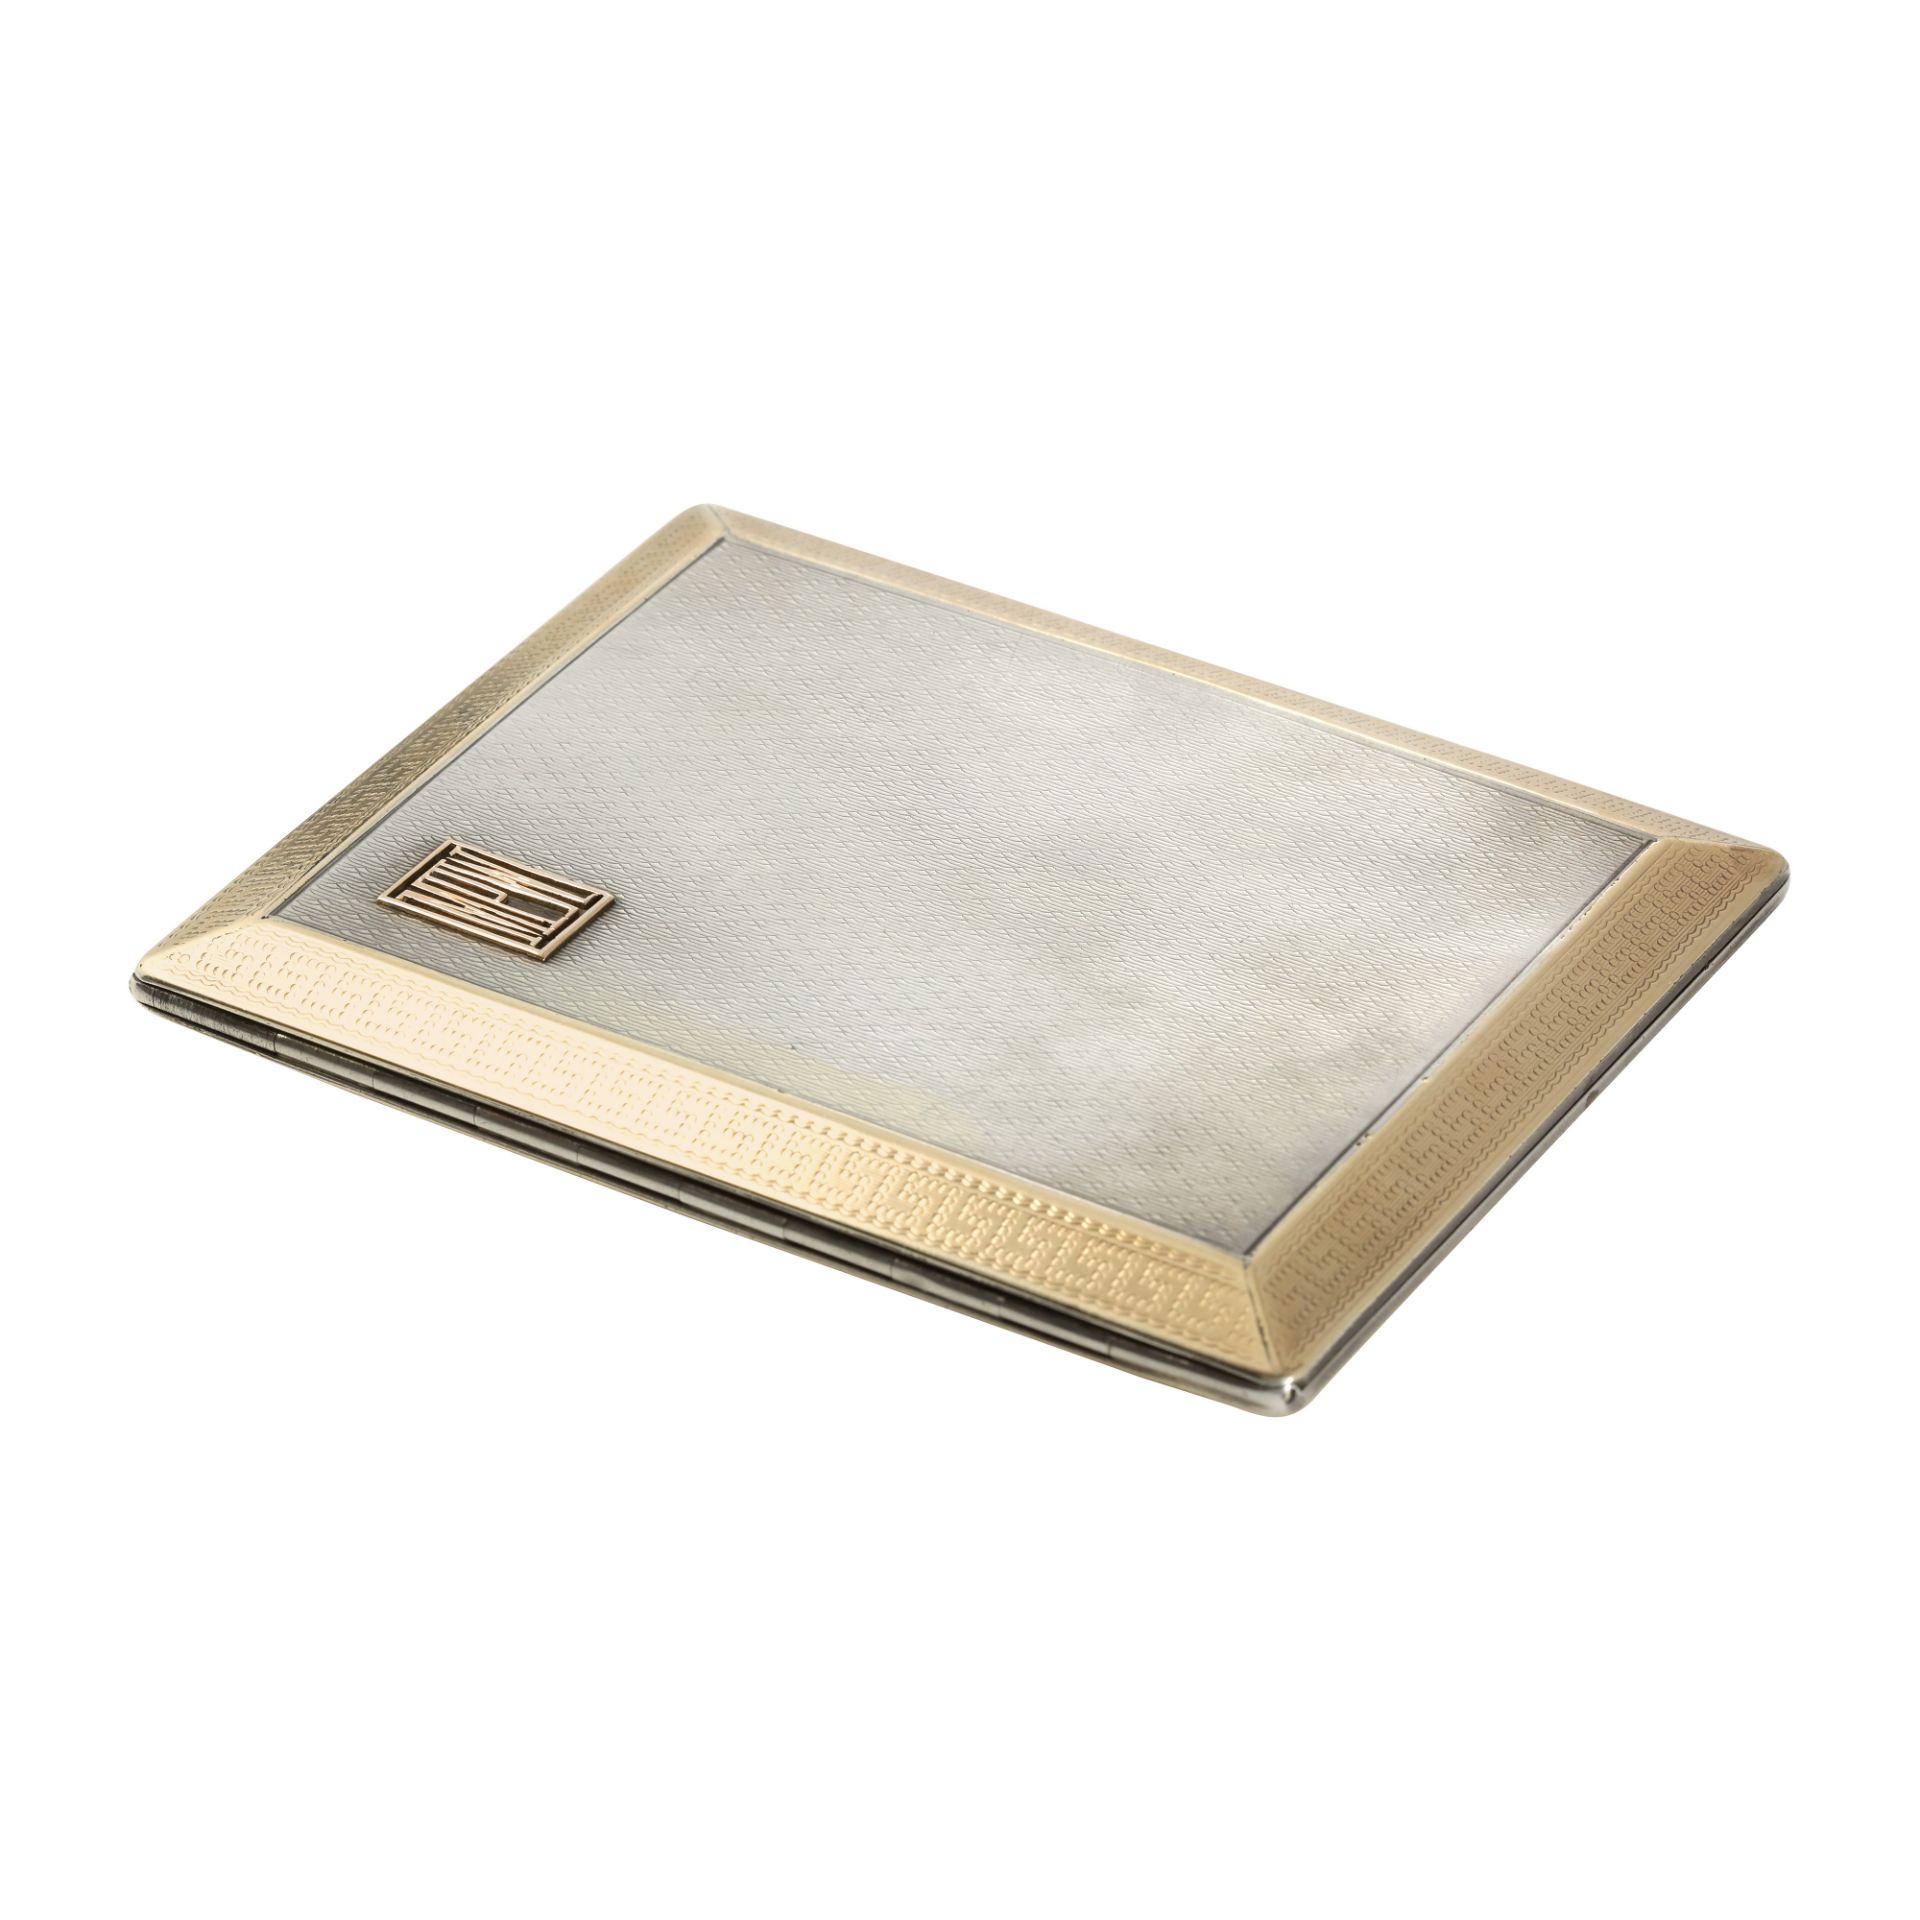 AN ANTIQUE SLIDING CIGARETTE CASE, ASPREY, LONDON 1933 in sterling silver and gold, of rectangular